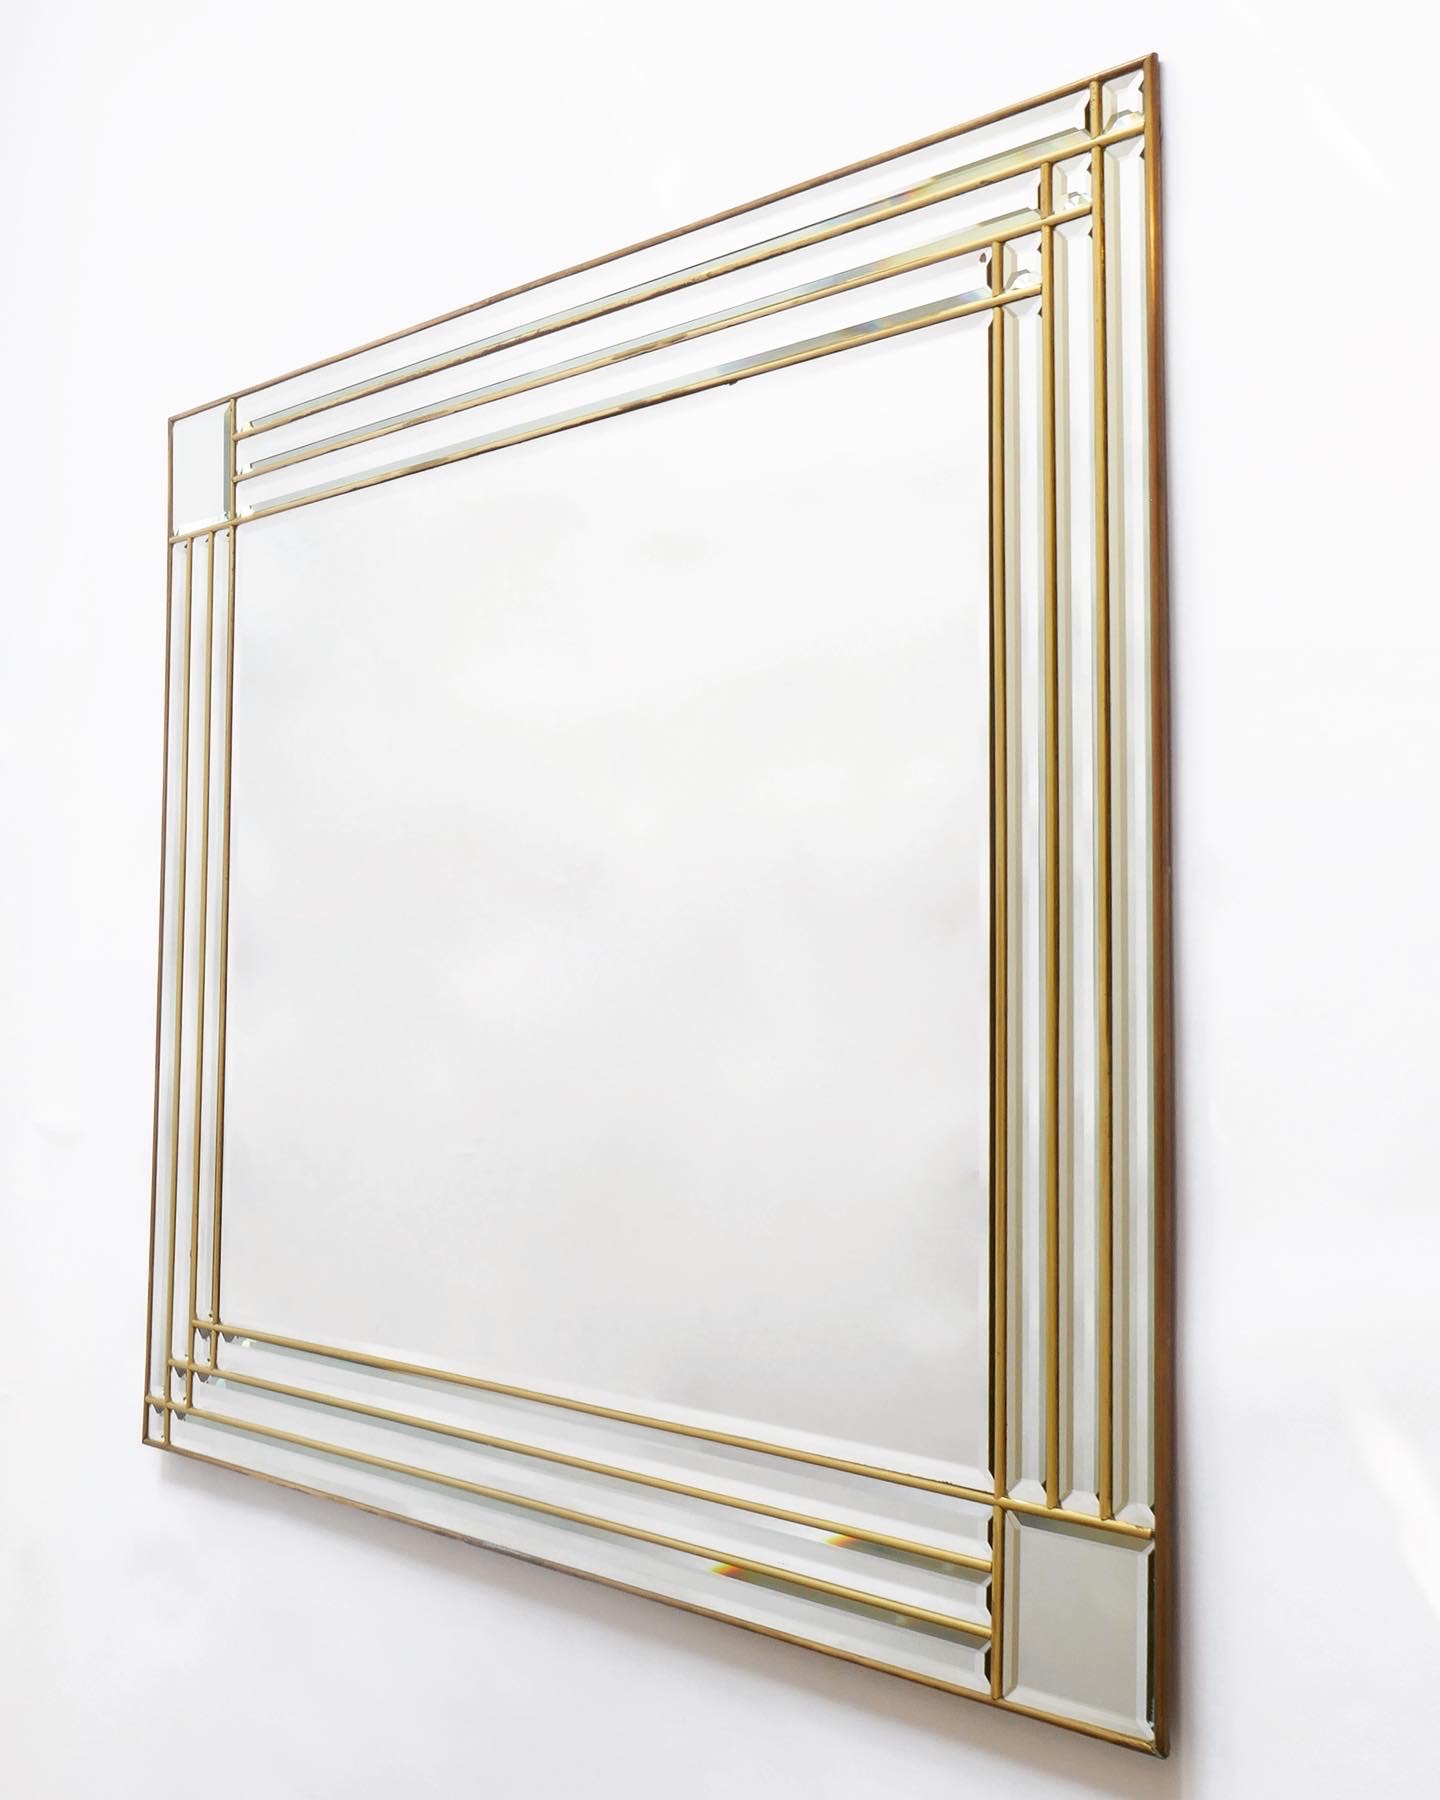 Sold - Large Rectangular Beveled Mirror with a Brass Frame, Italy, 1970s